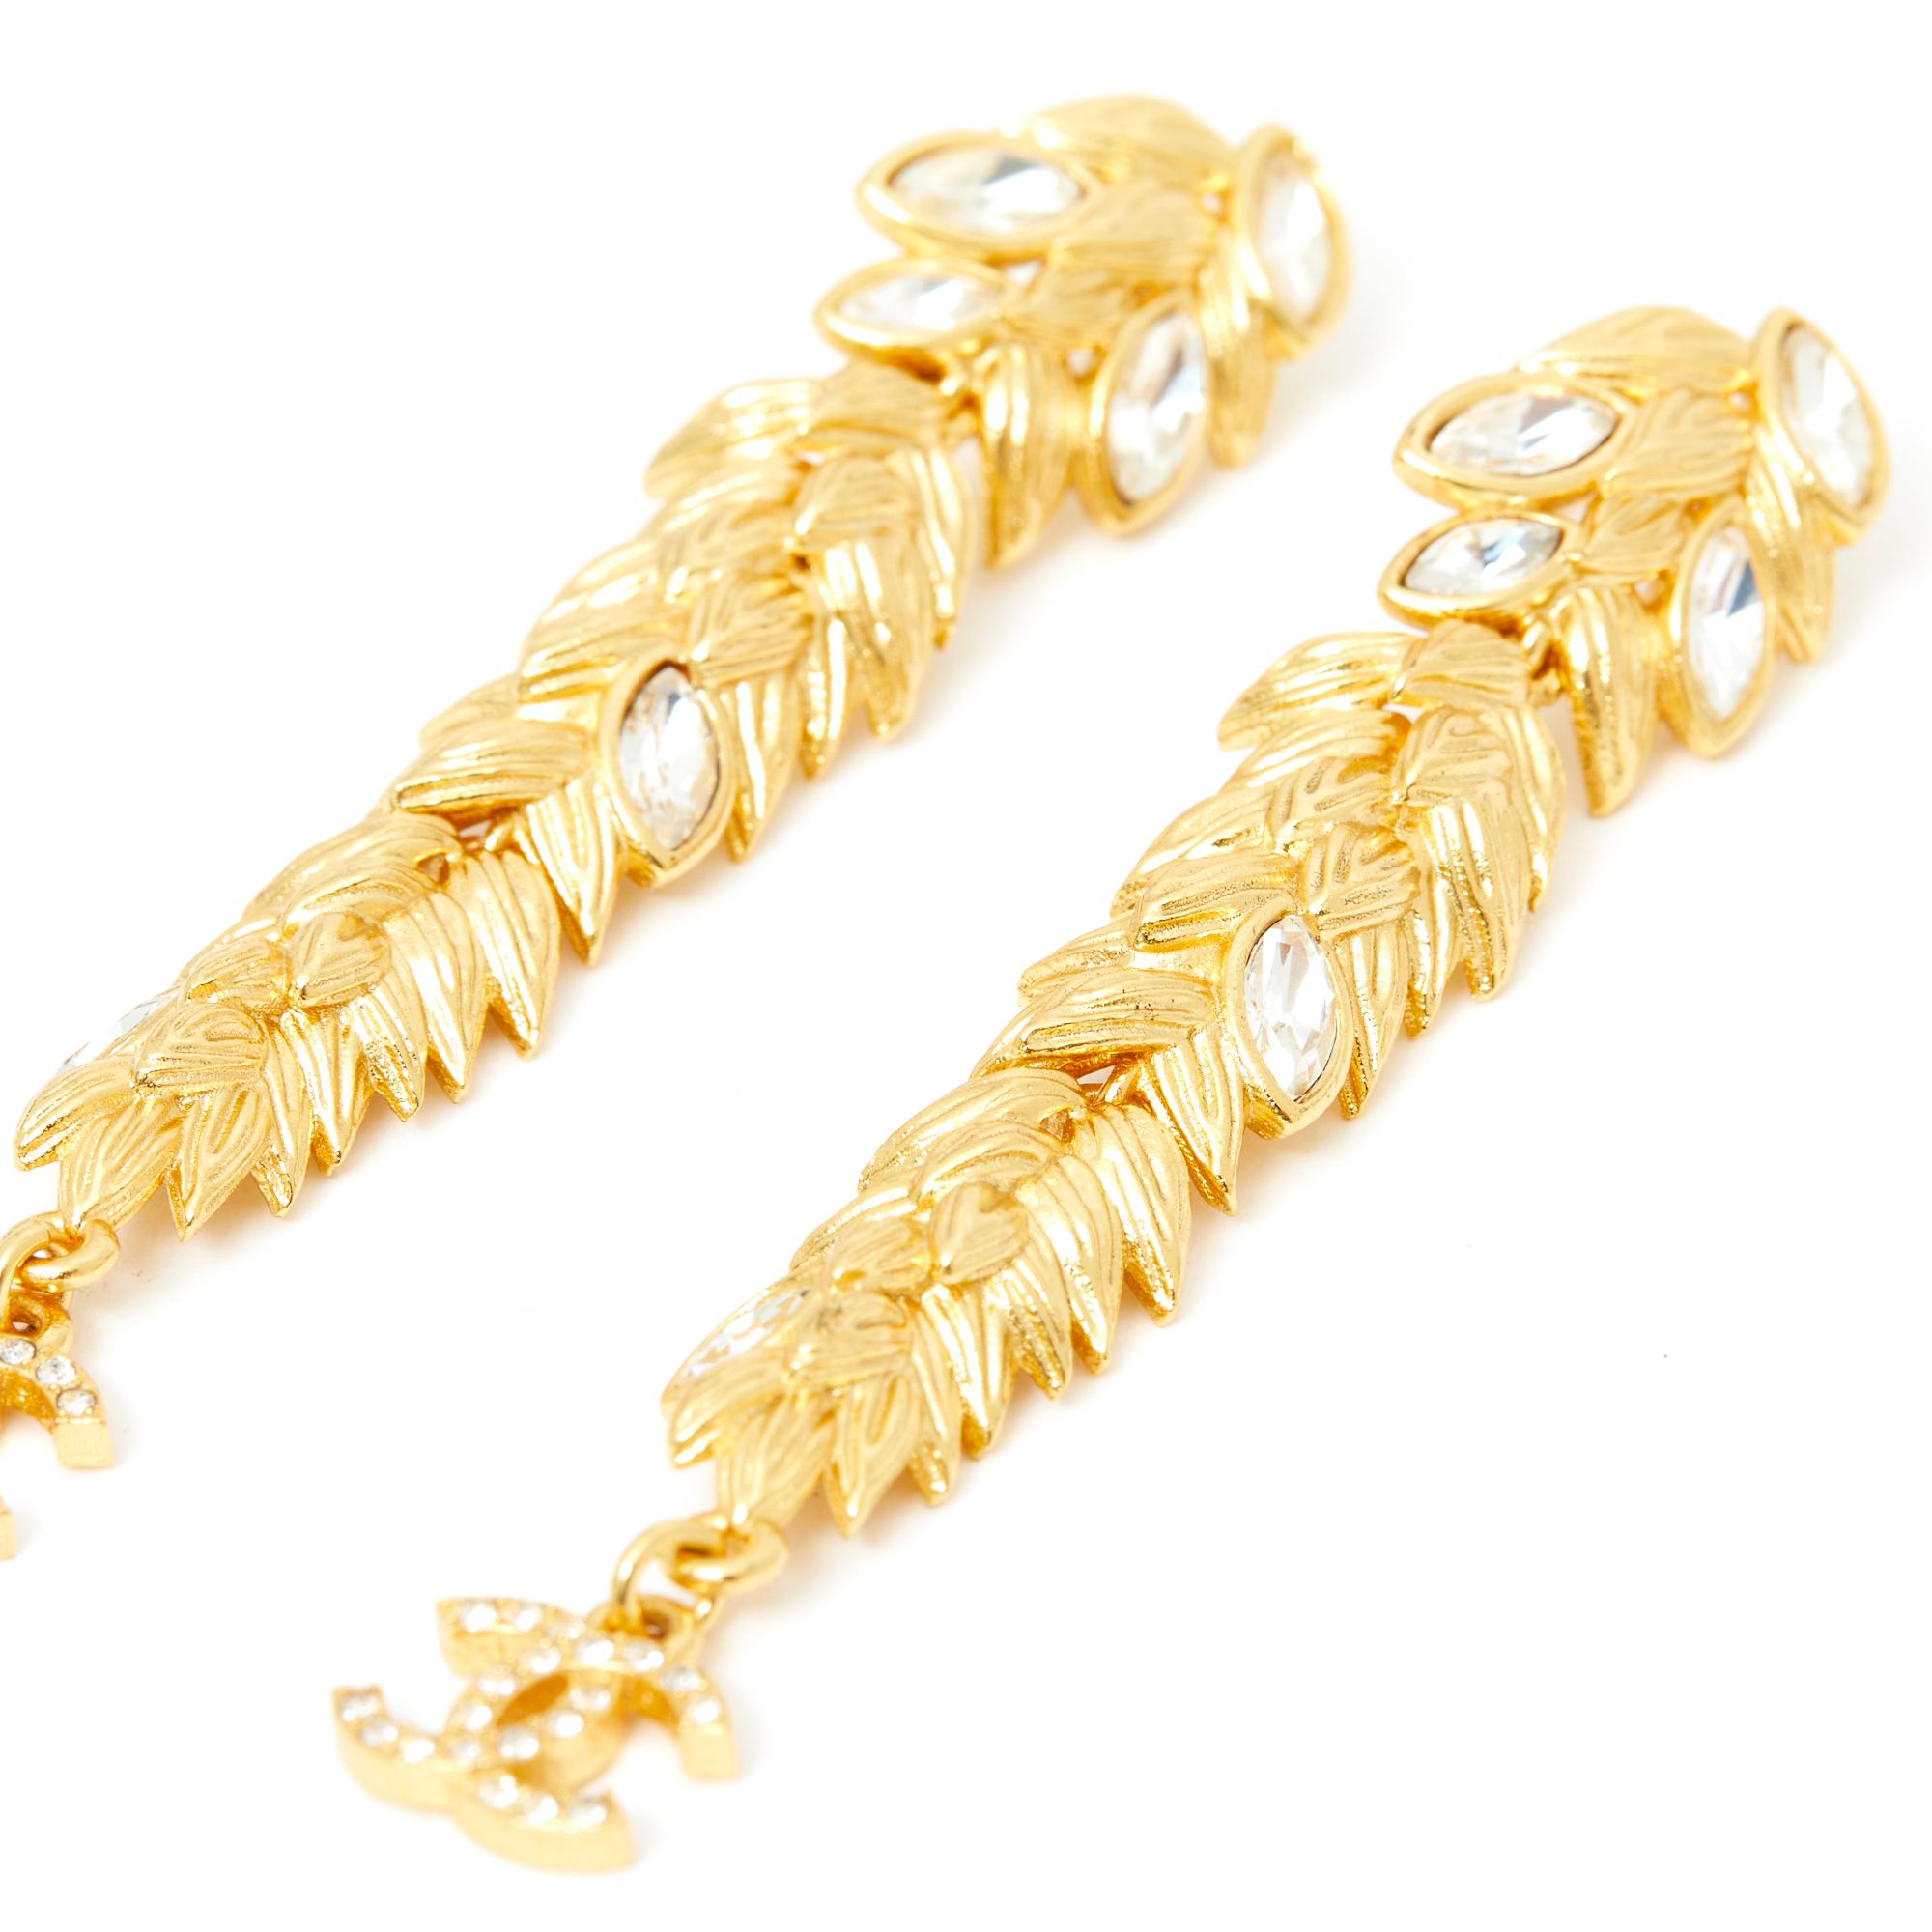 Chanel earrings, SS or Resort 2020 collection, gold metal studs with a foliage or ear of wheat motif inlaid with white shuttle rhinestones, small CC encrusted with rhinestones at the bottom of the buckle. Total length 7.4 cm x width 1.35 cm. The